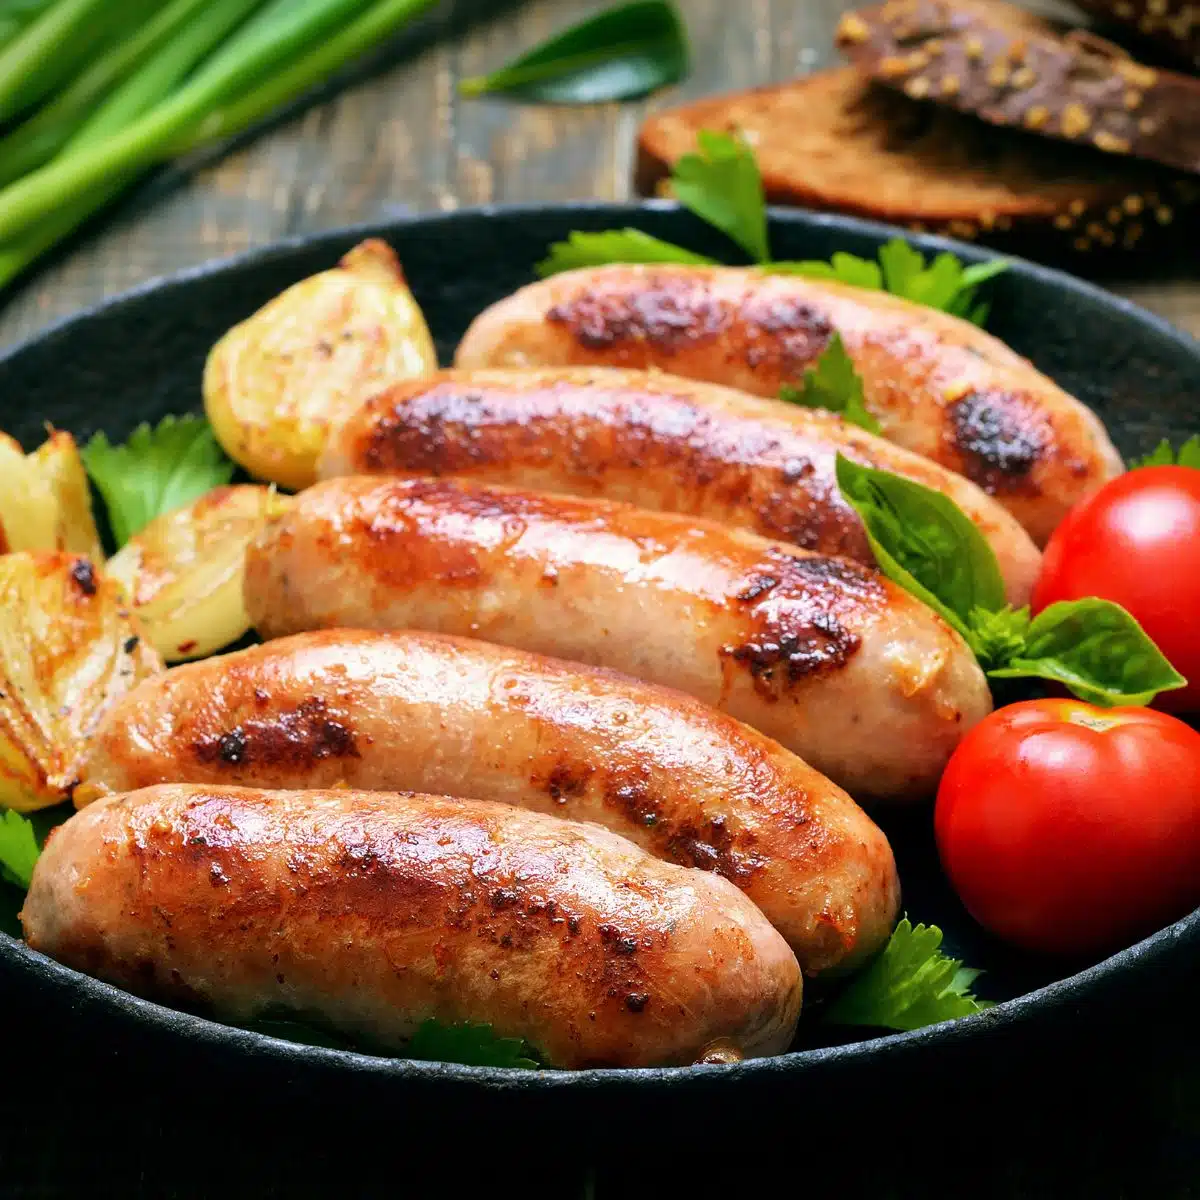 Square image of sausage in a skillet.